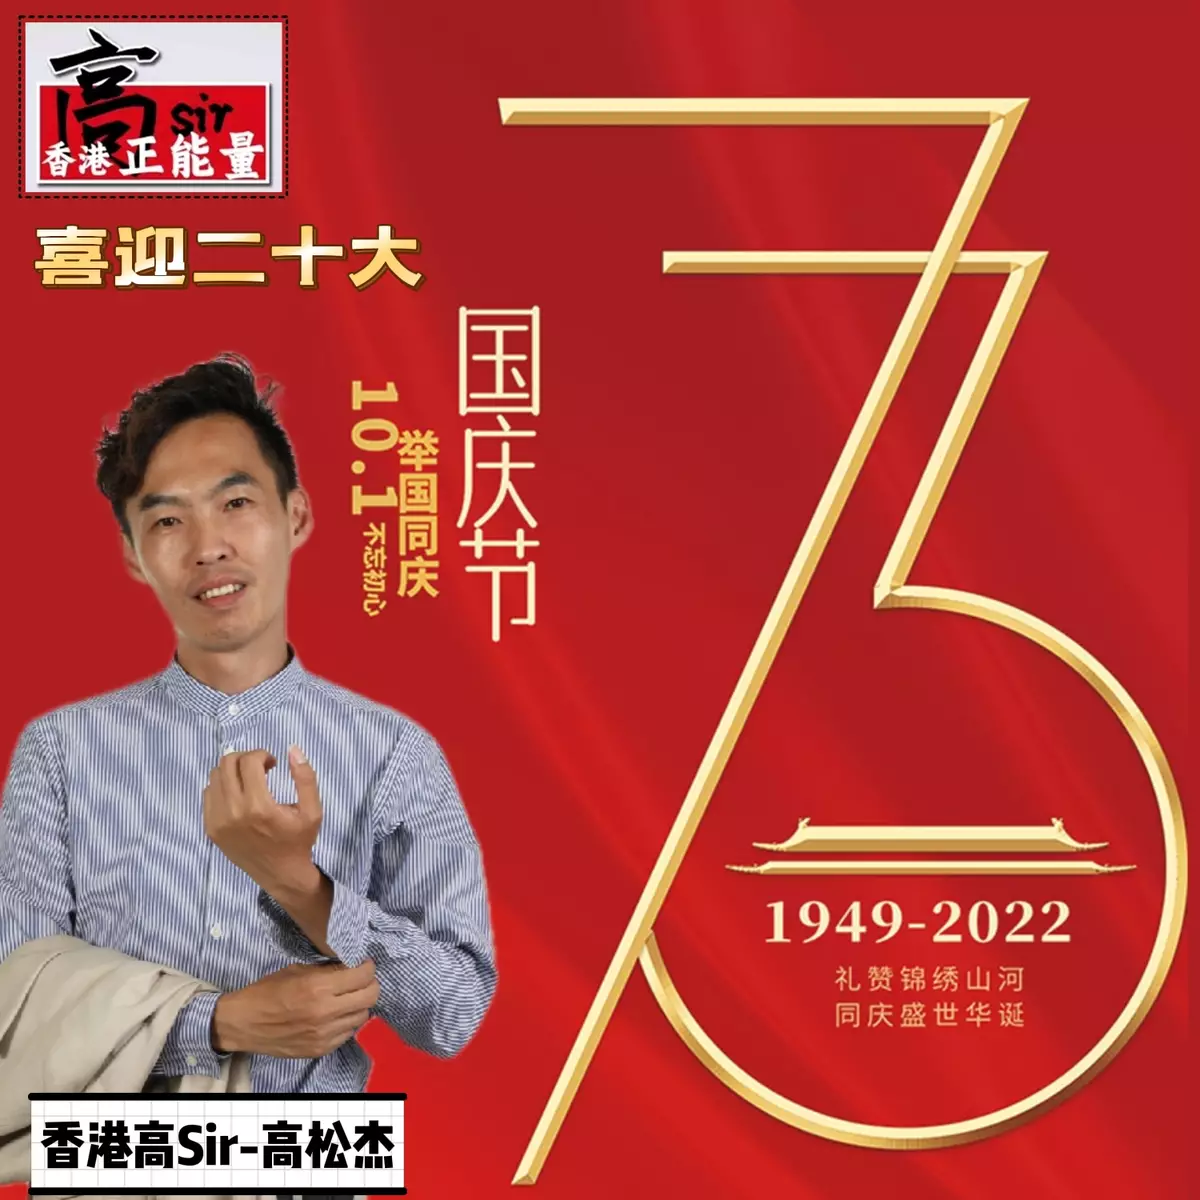 Celebrating the 73rd anniversary of the founding of the People's Republic of China!香港高Sir-高松傑熱烈慶祝新中國成立73周年!